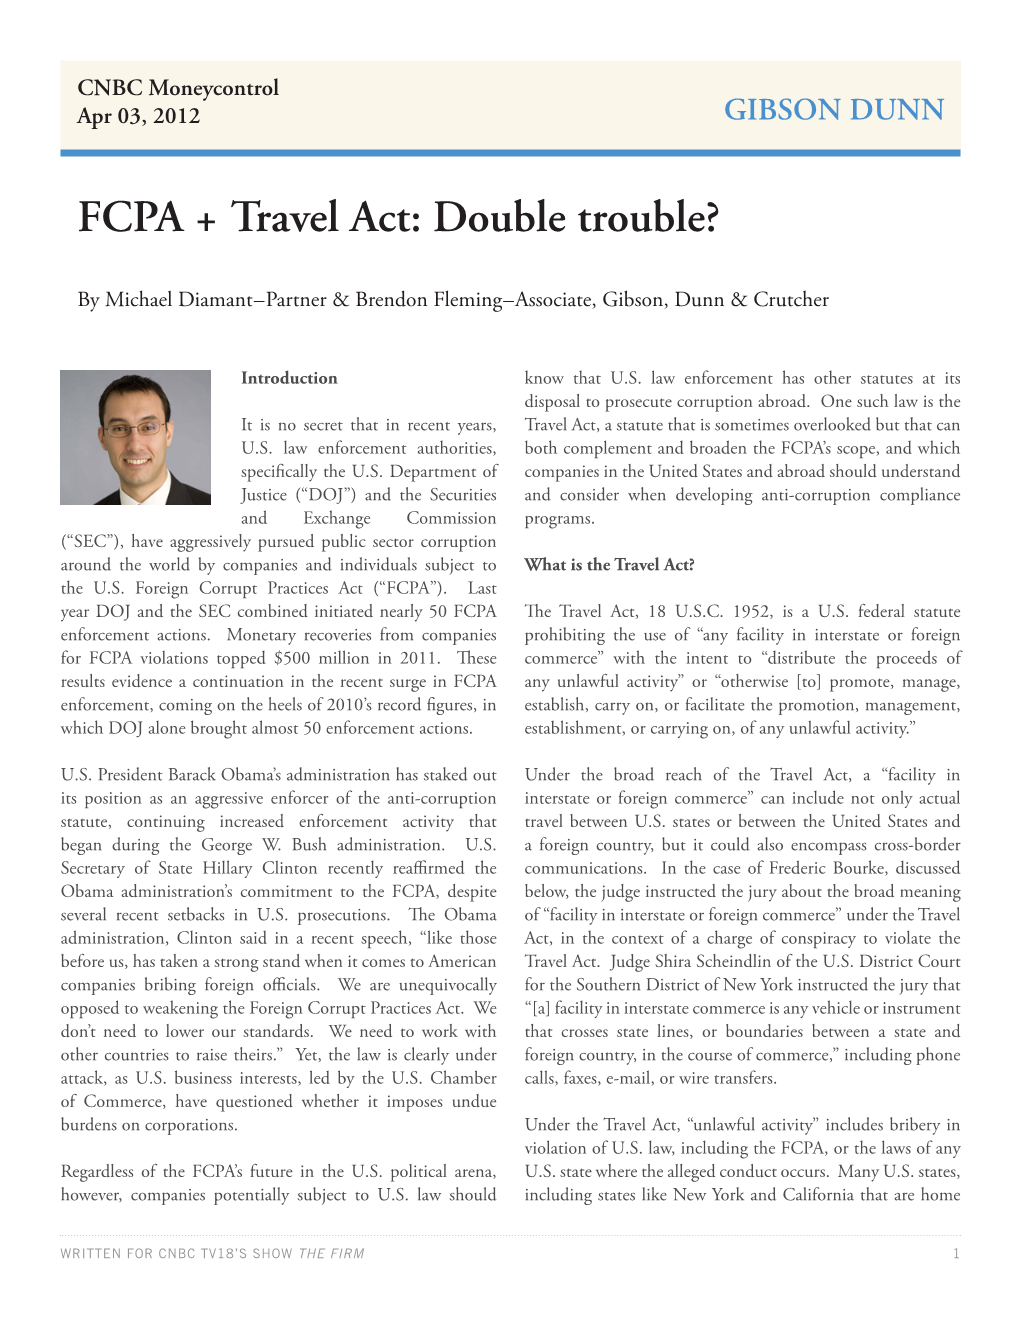 FCPA + Travel Act: Double Trouble?